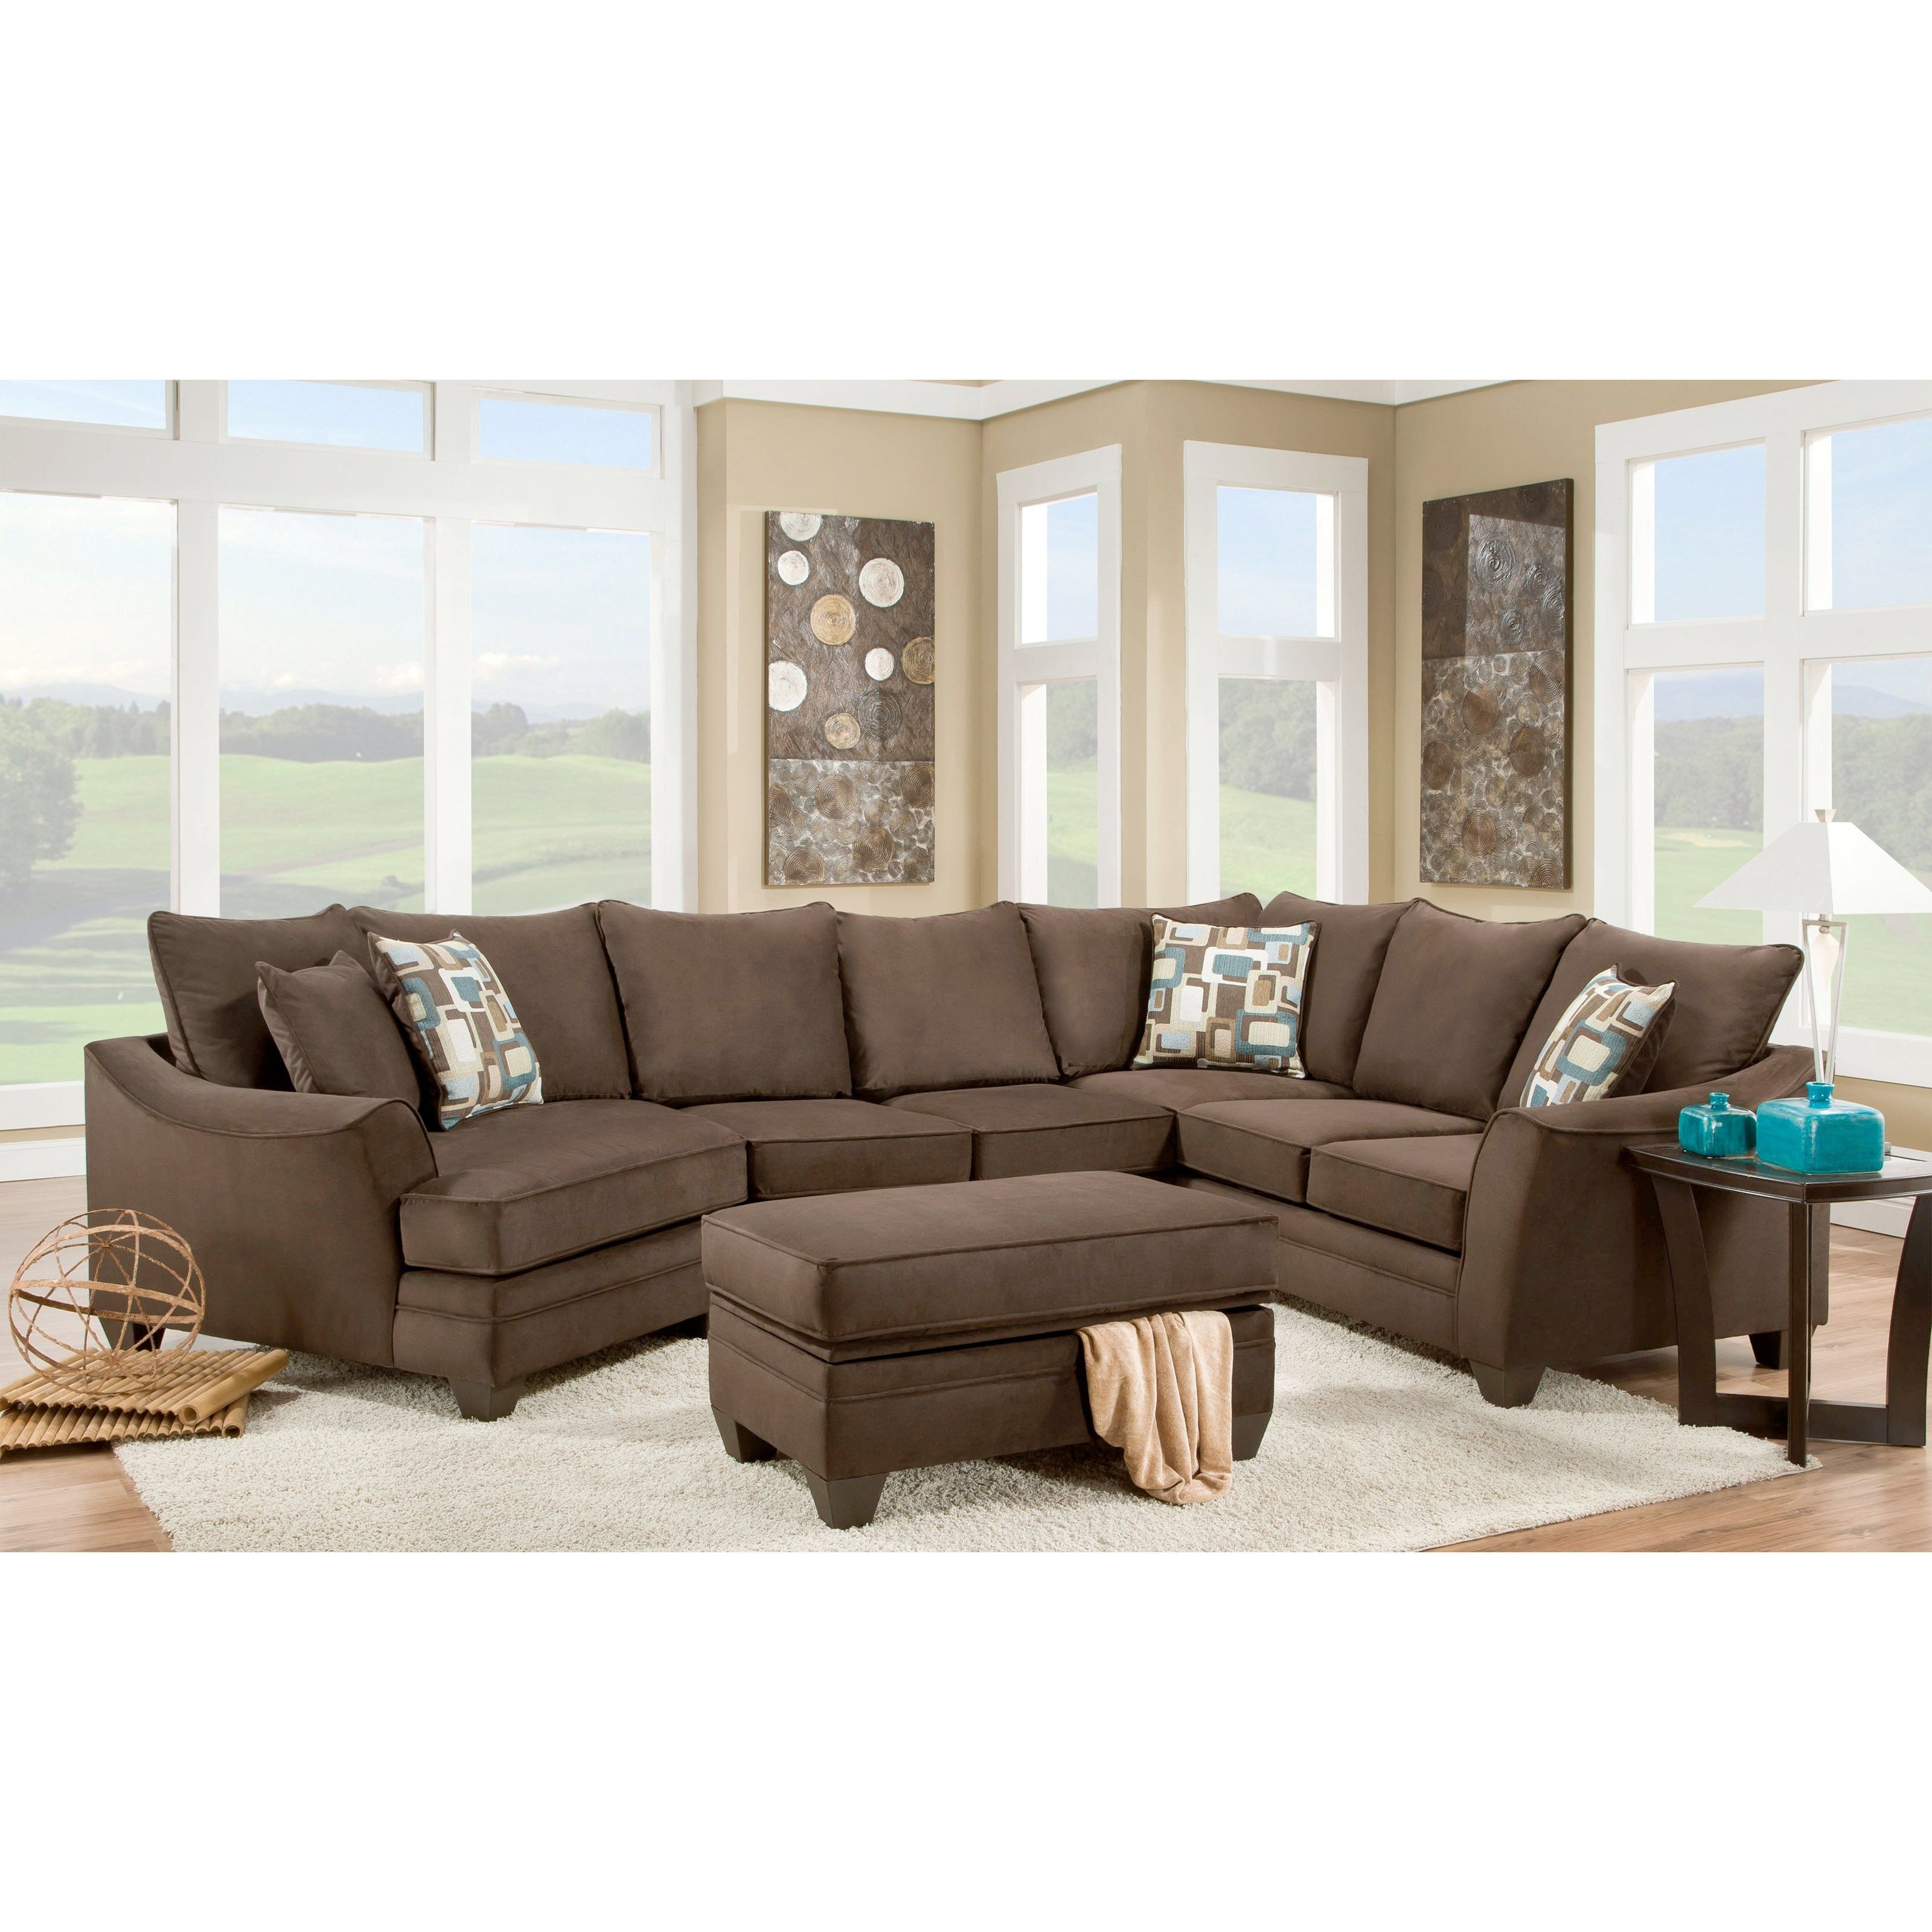 Featured Photo of 15 Best Ideas Greensboro Nc Sectional Sofas